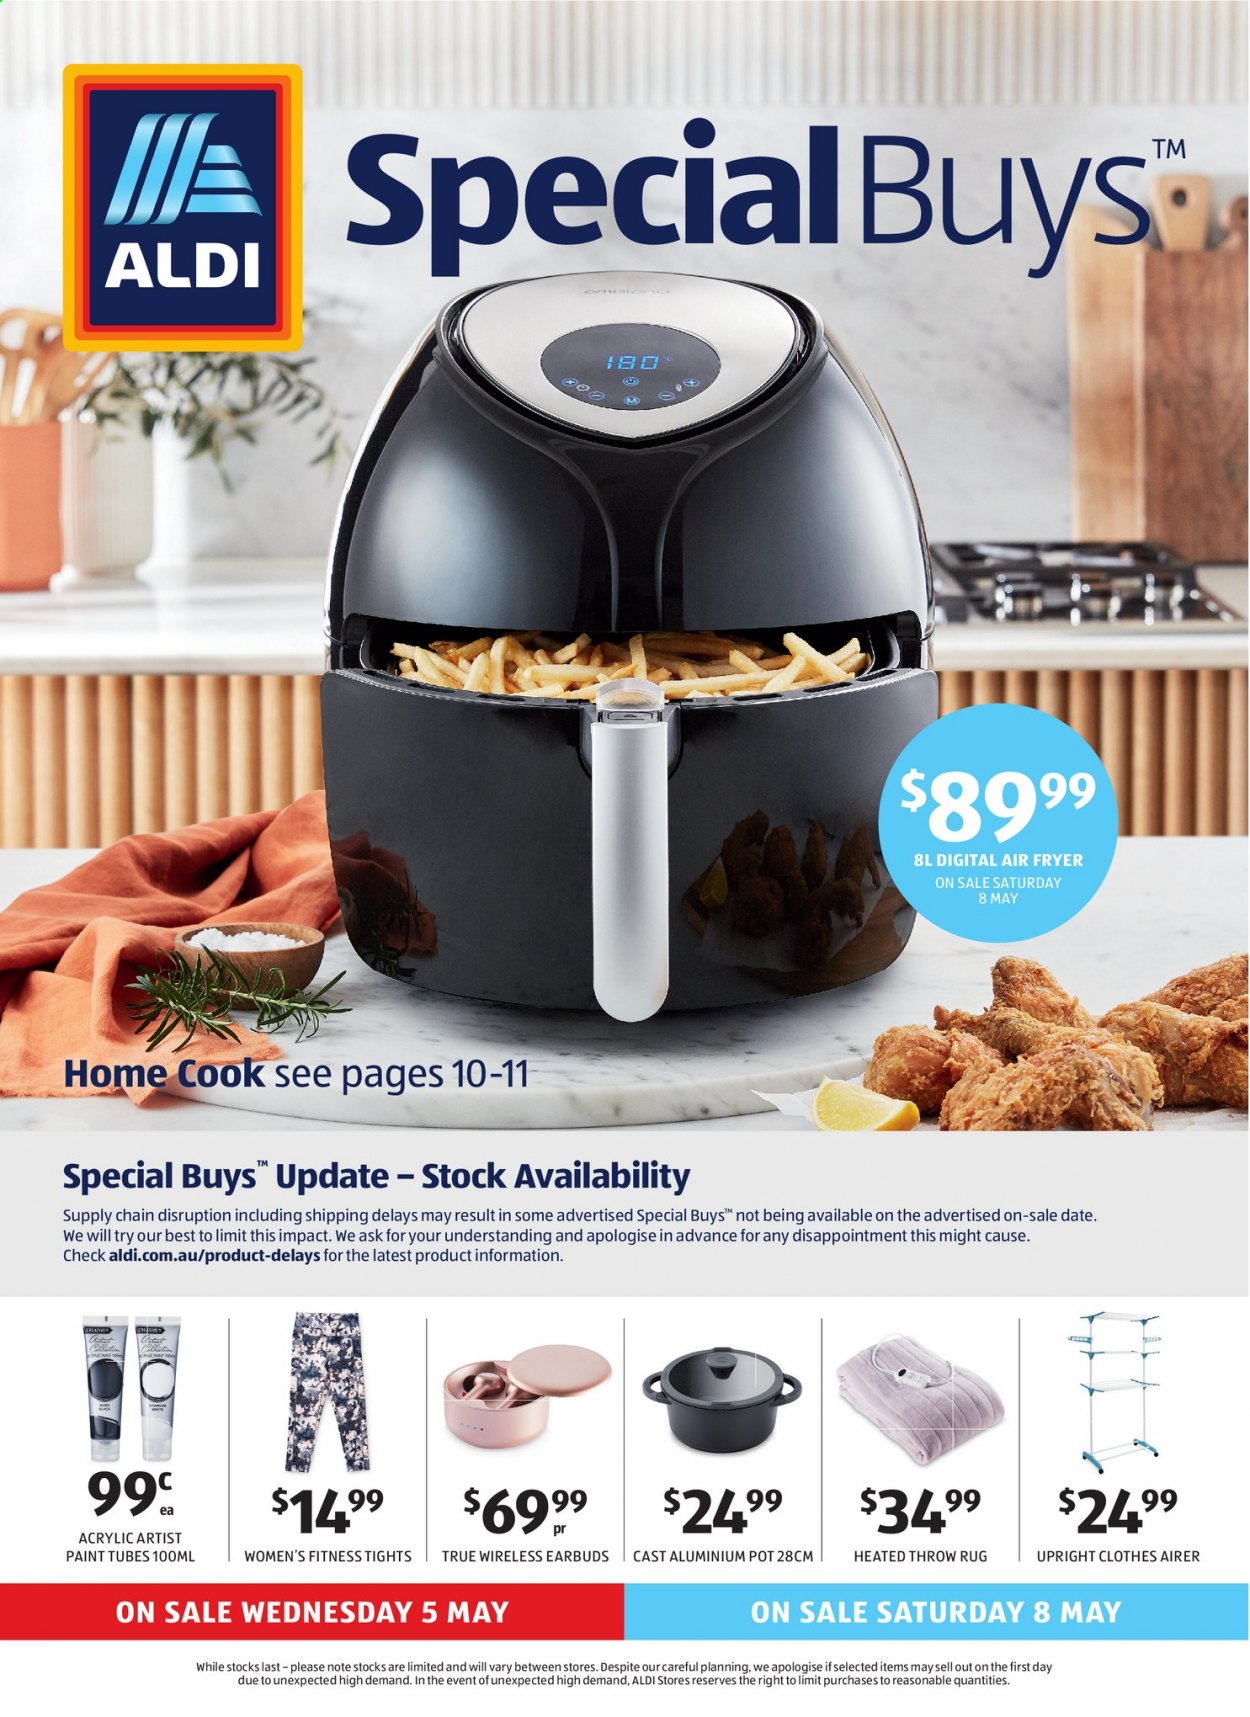 thumbnail - ALDI Catalogue - 5 May 2021 - 11 May 2021 - Sales products - airer, pot, earbuds, air fryer, heated throw, tights. Page 1.